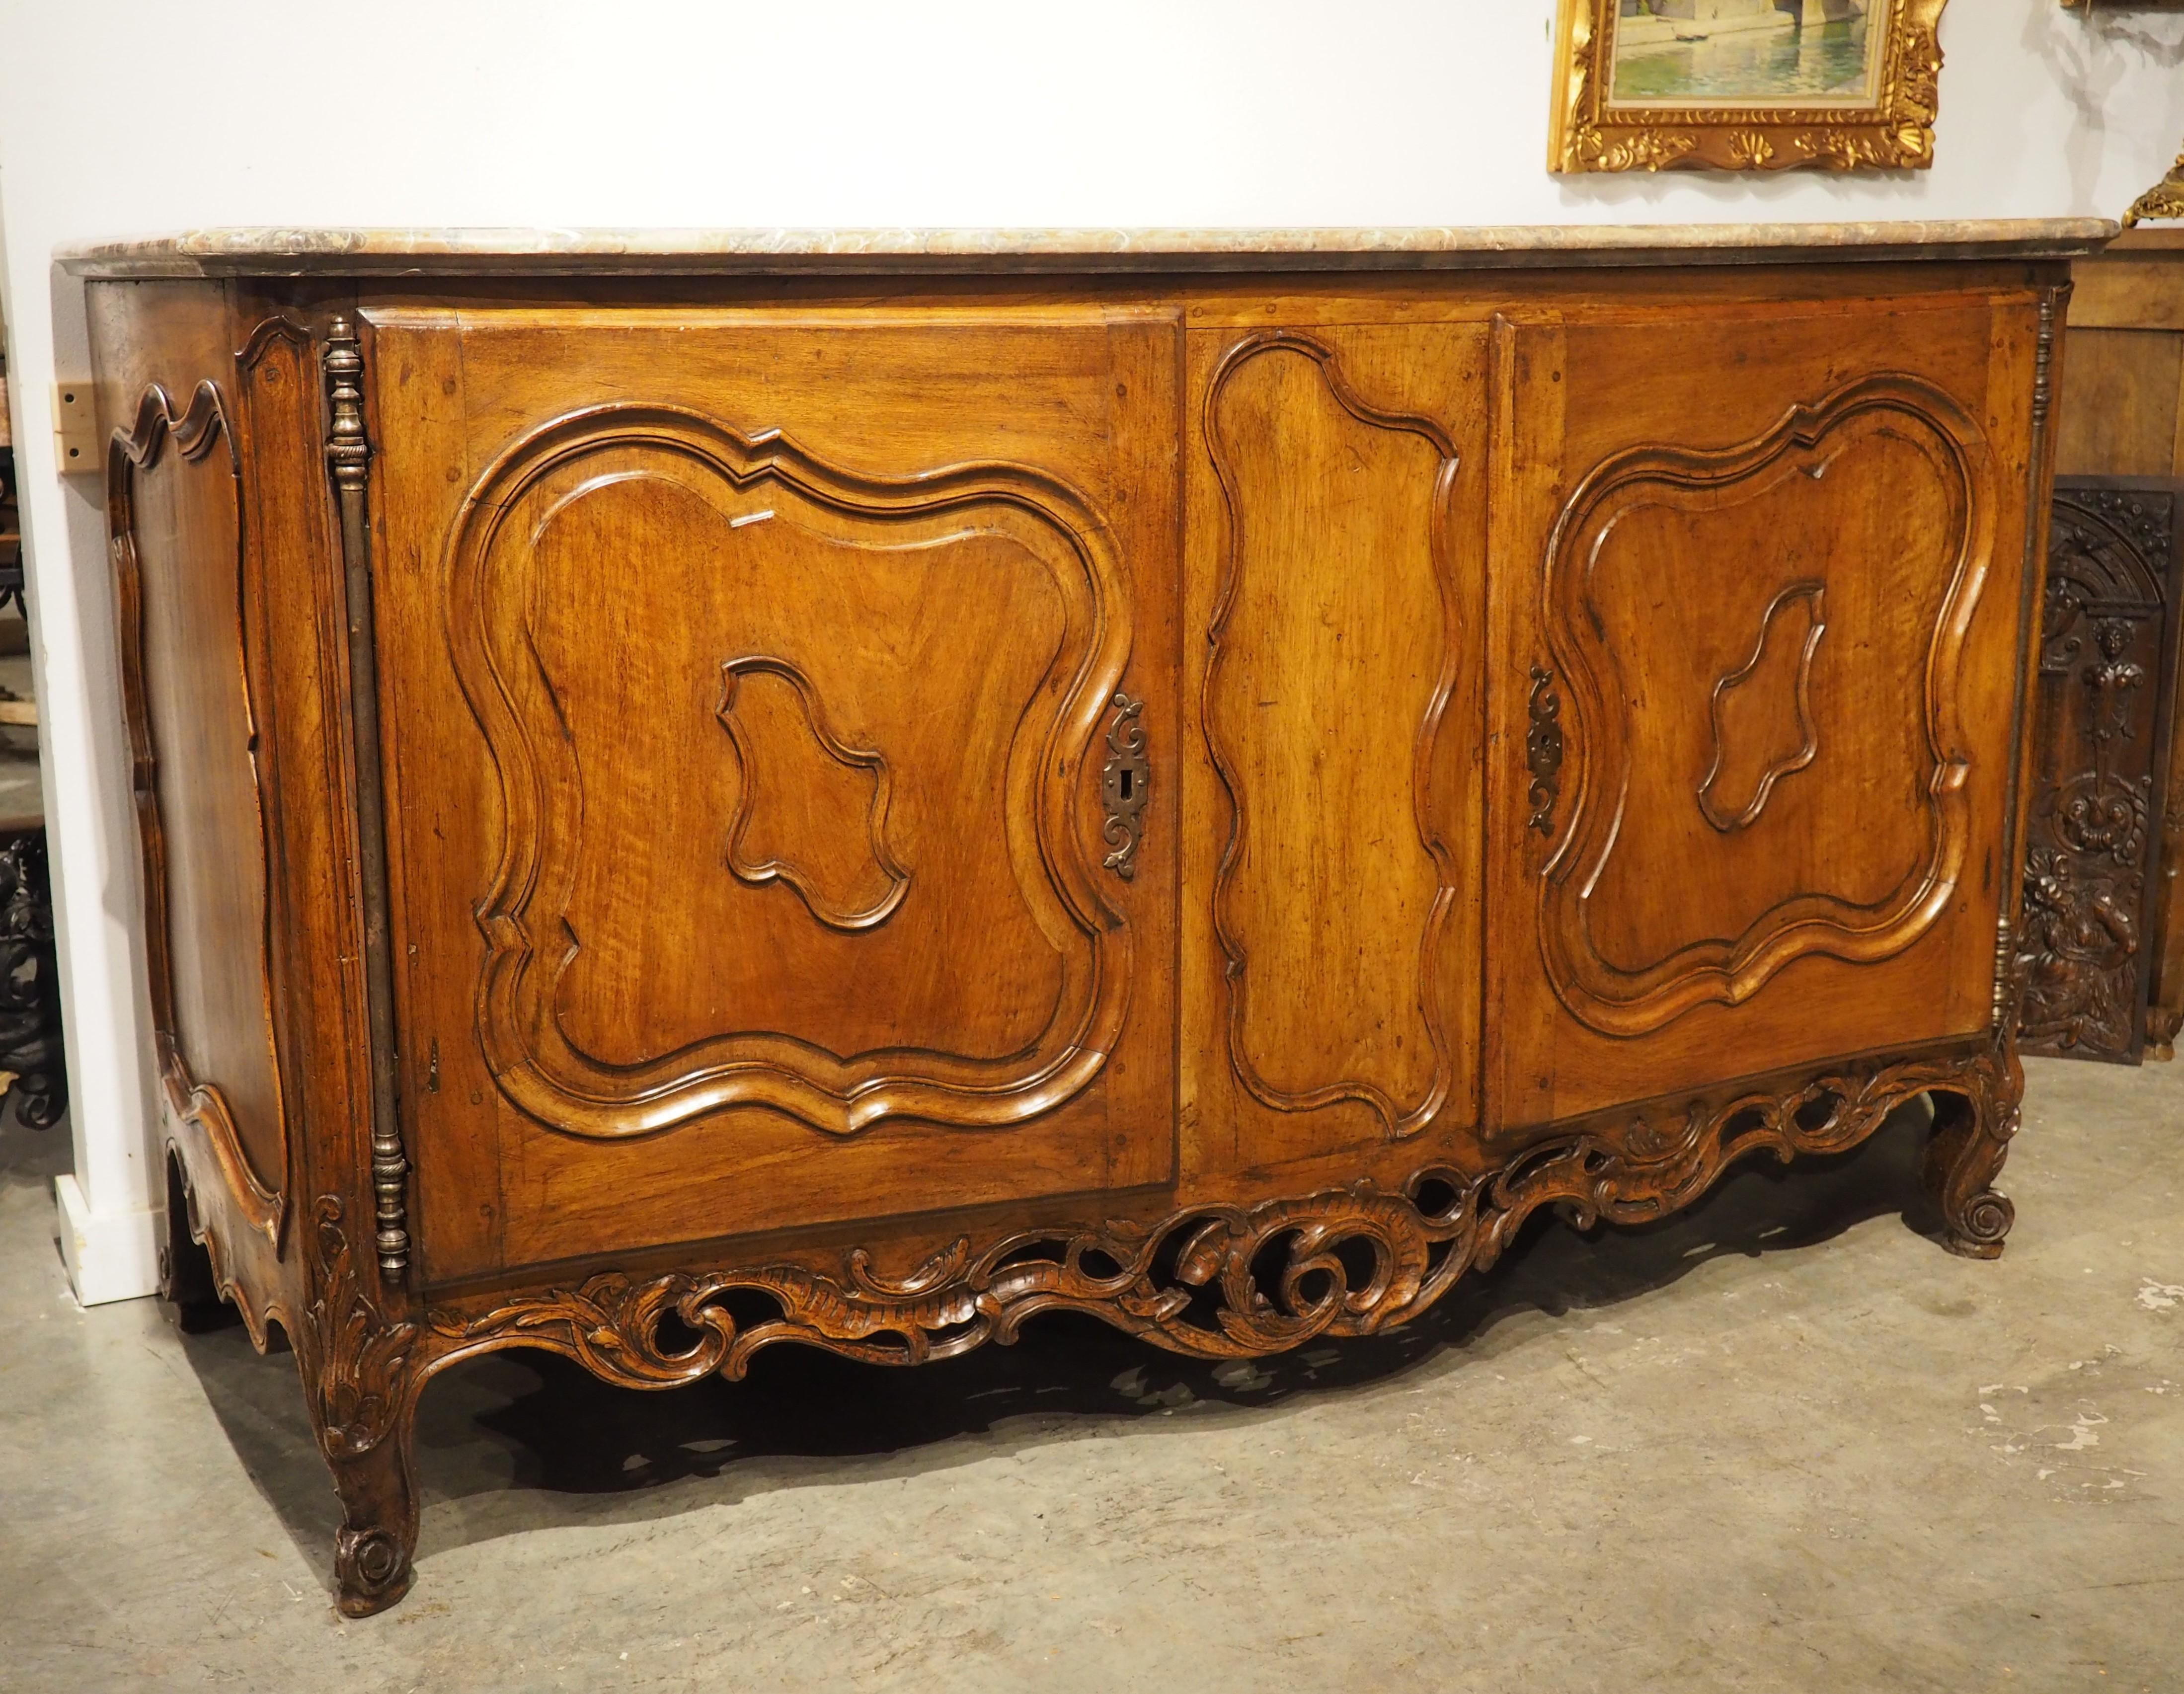 Exceptional and Large Walnut Wood Buffet de Chateau, Nimes, France, C. 1750 For Sale 5